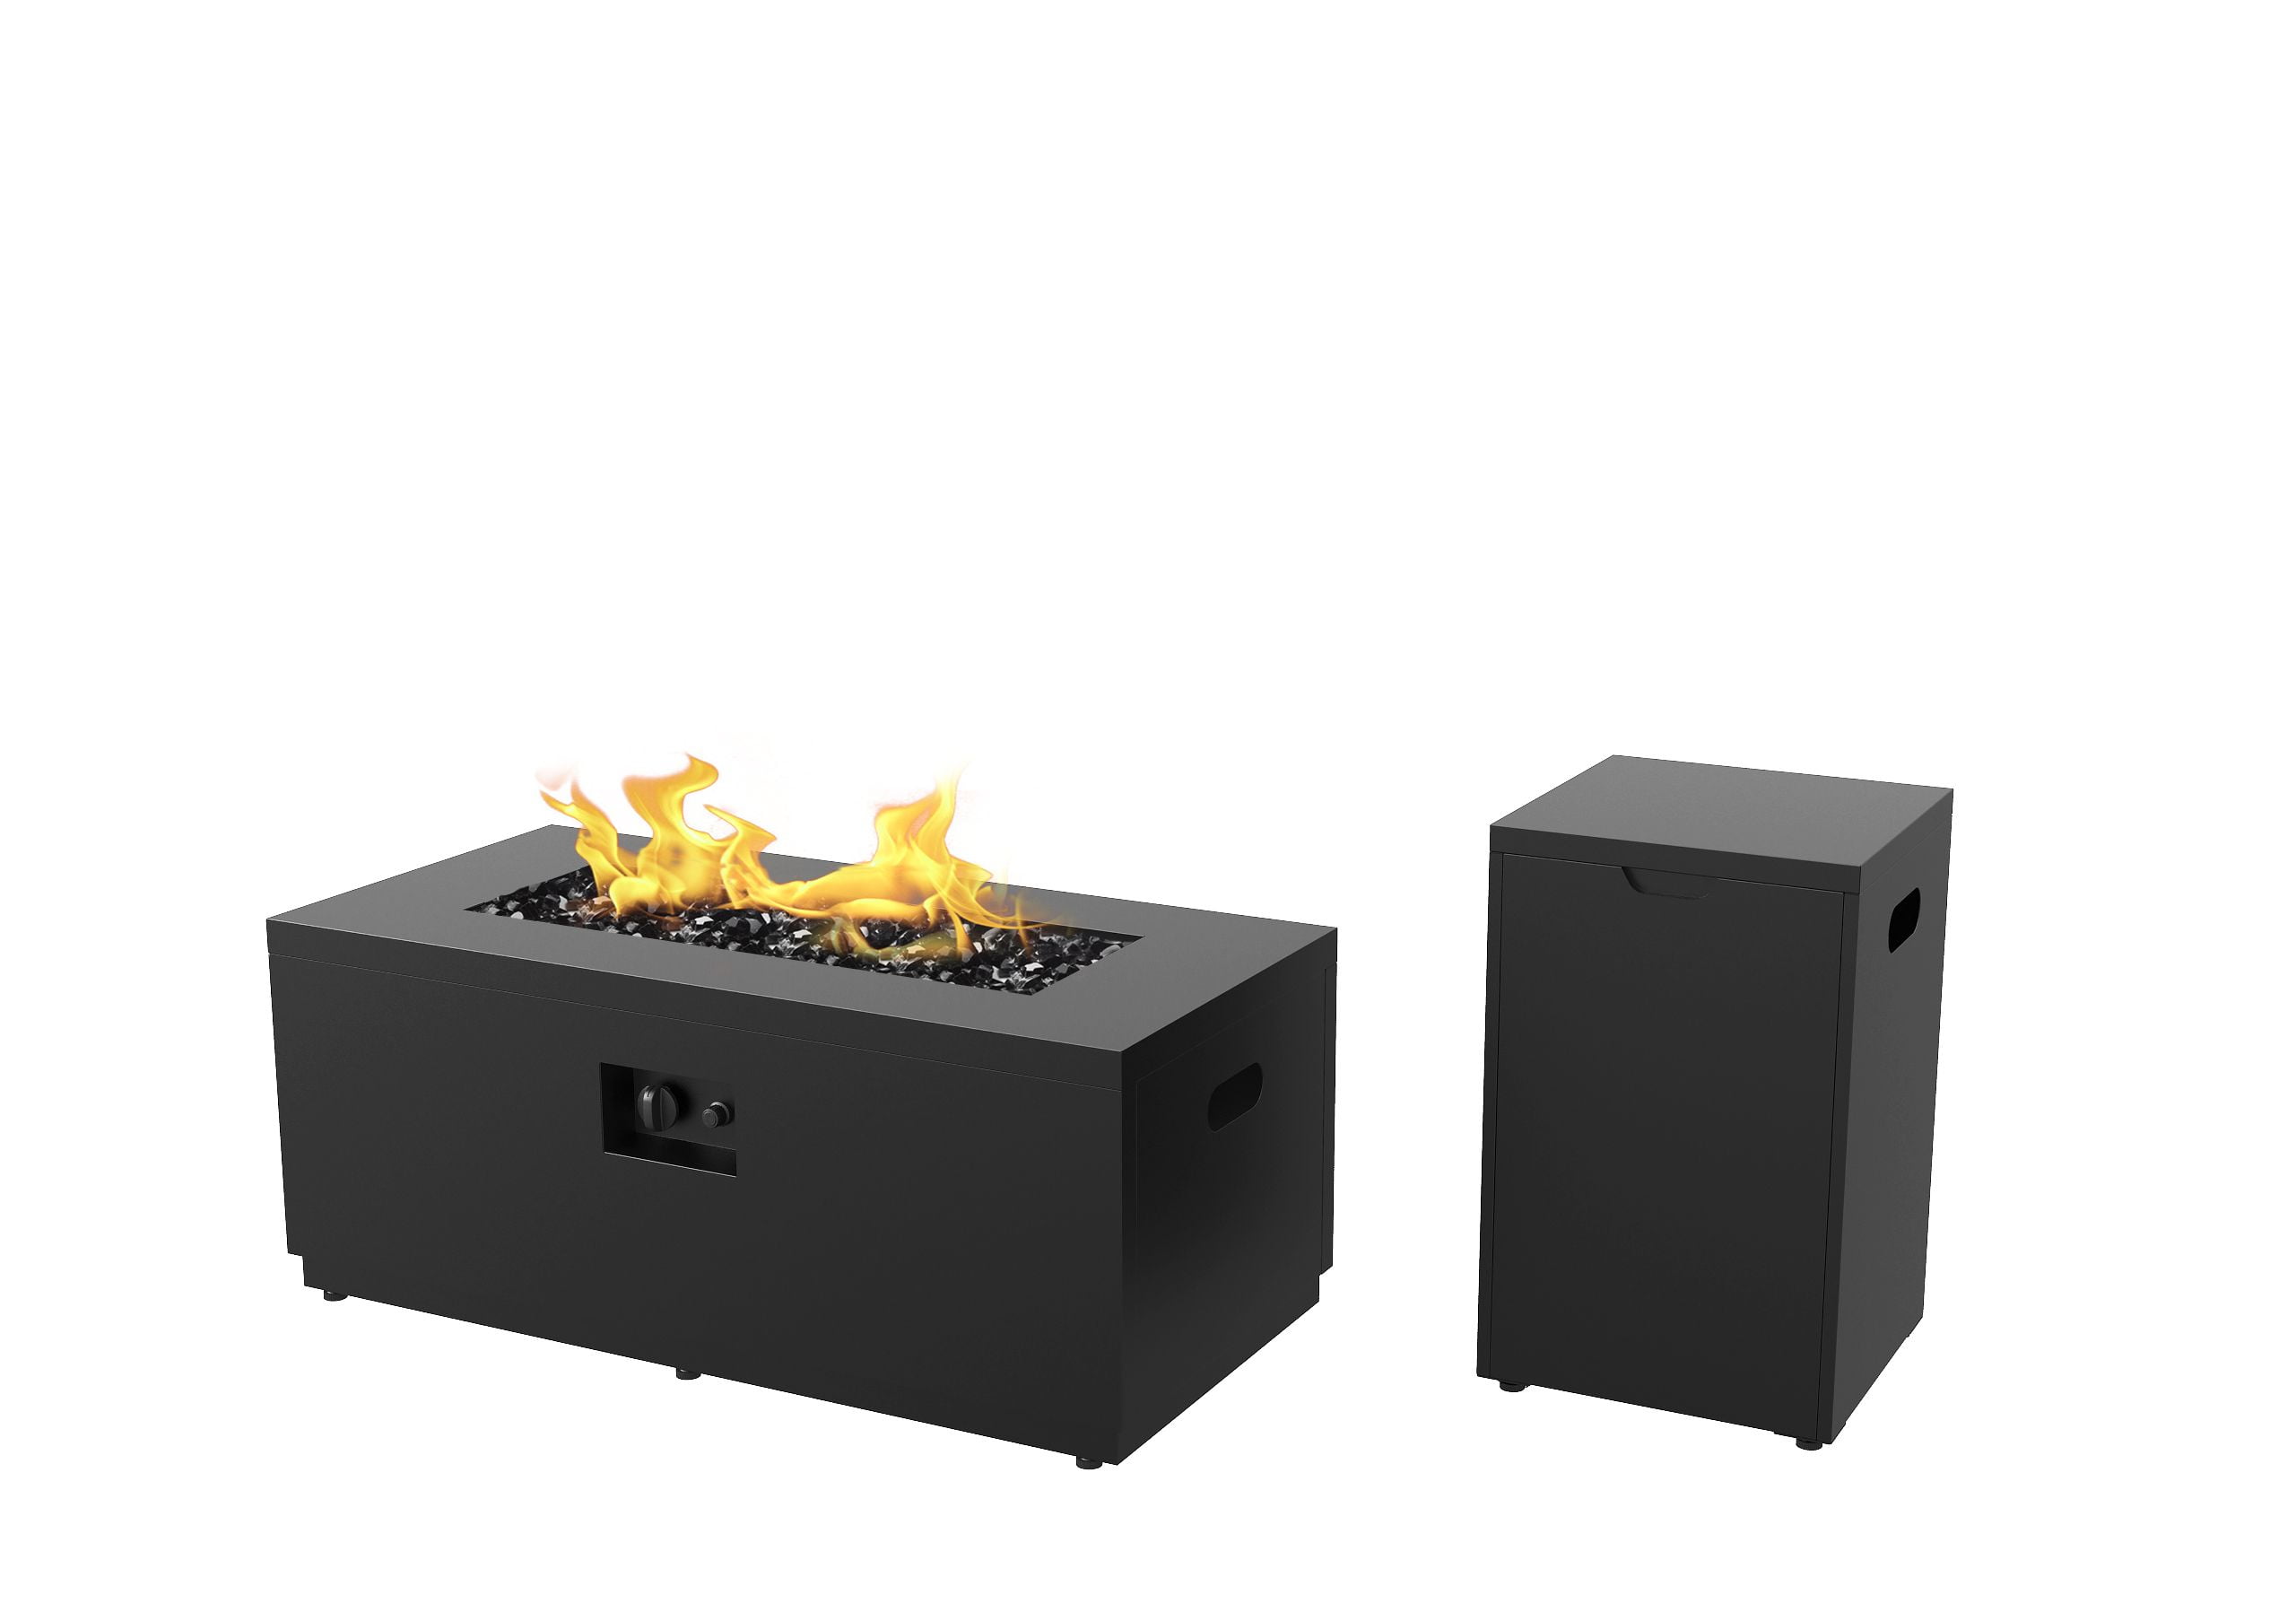 42" Better Homes & Gardens Rectangle Gas Fire Pit (Black) $198 + Free Shipping